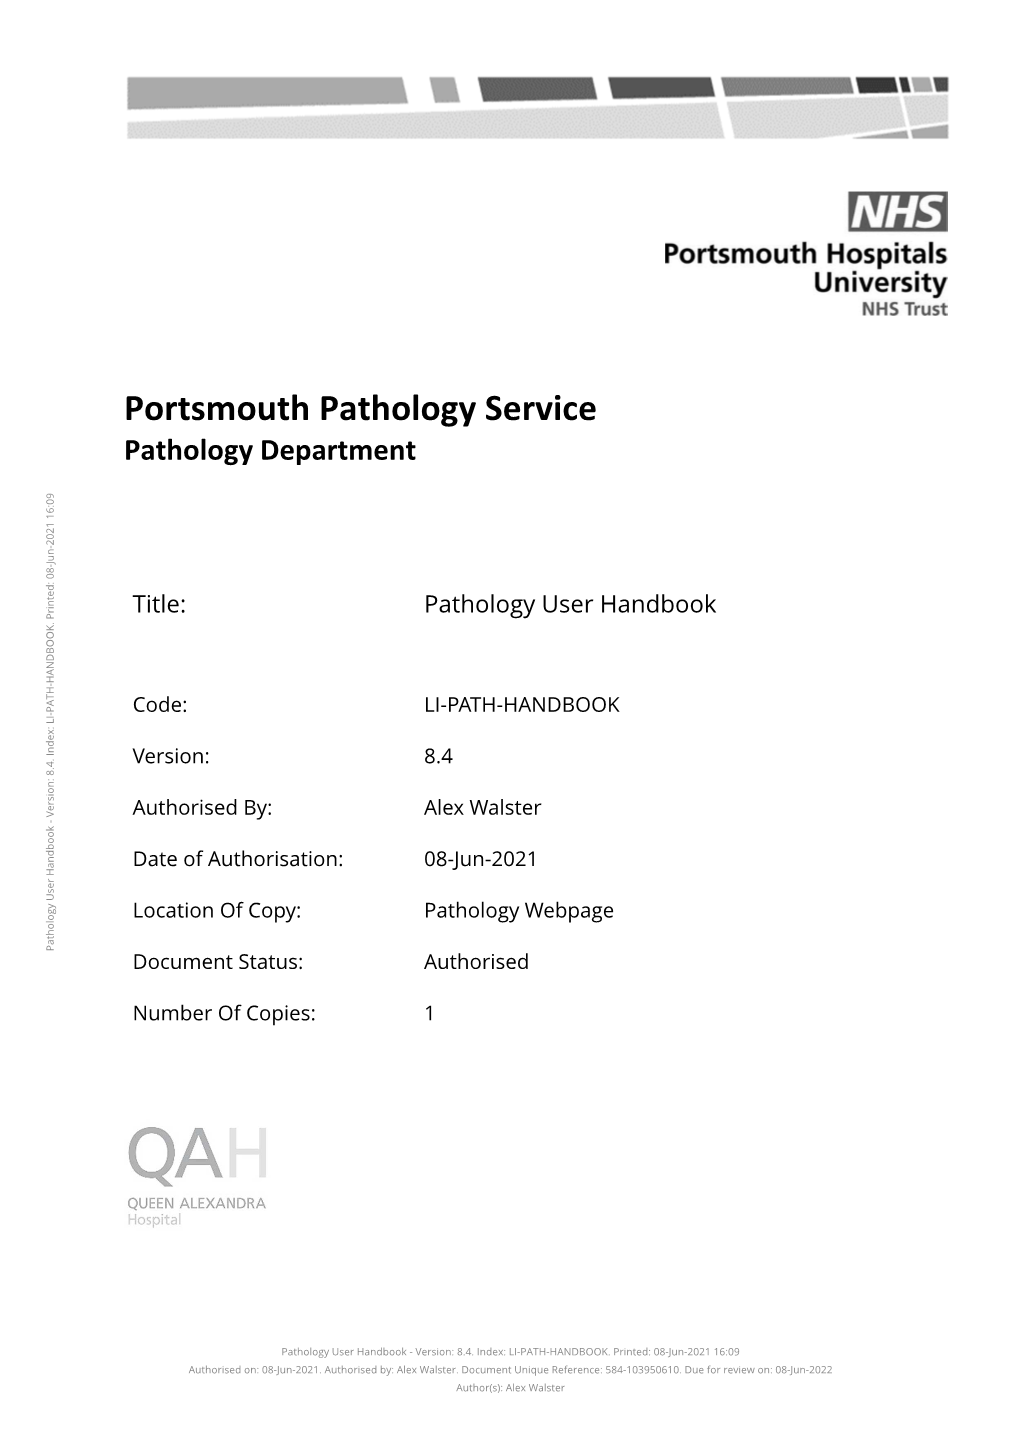 Pathology Handbook May Be Subject to Changes Within the Stated Review Date